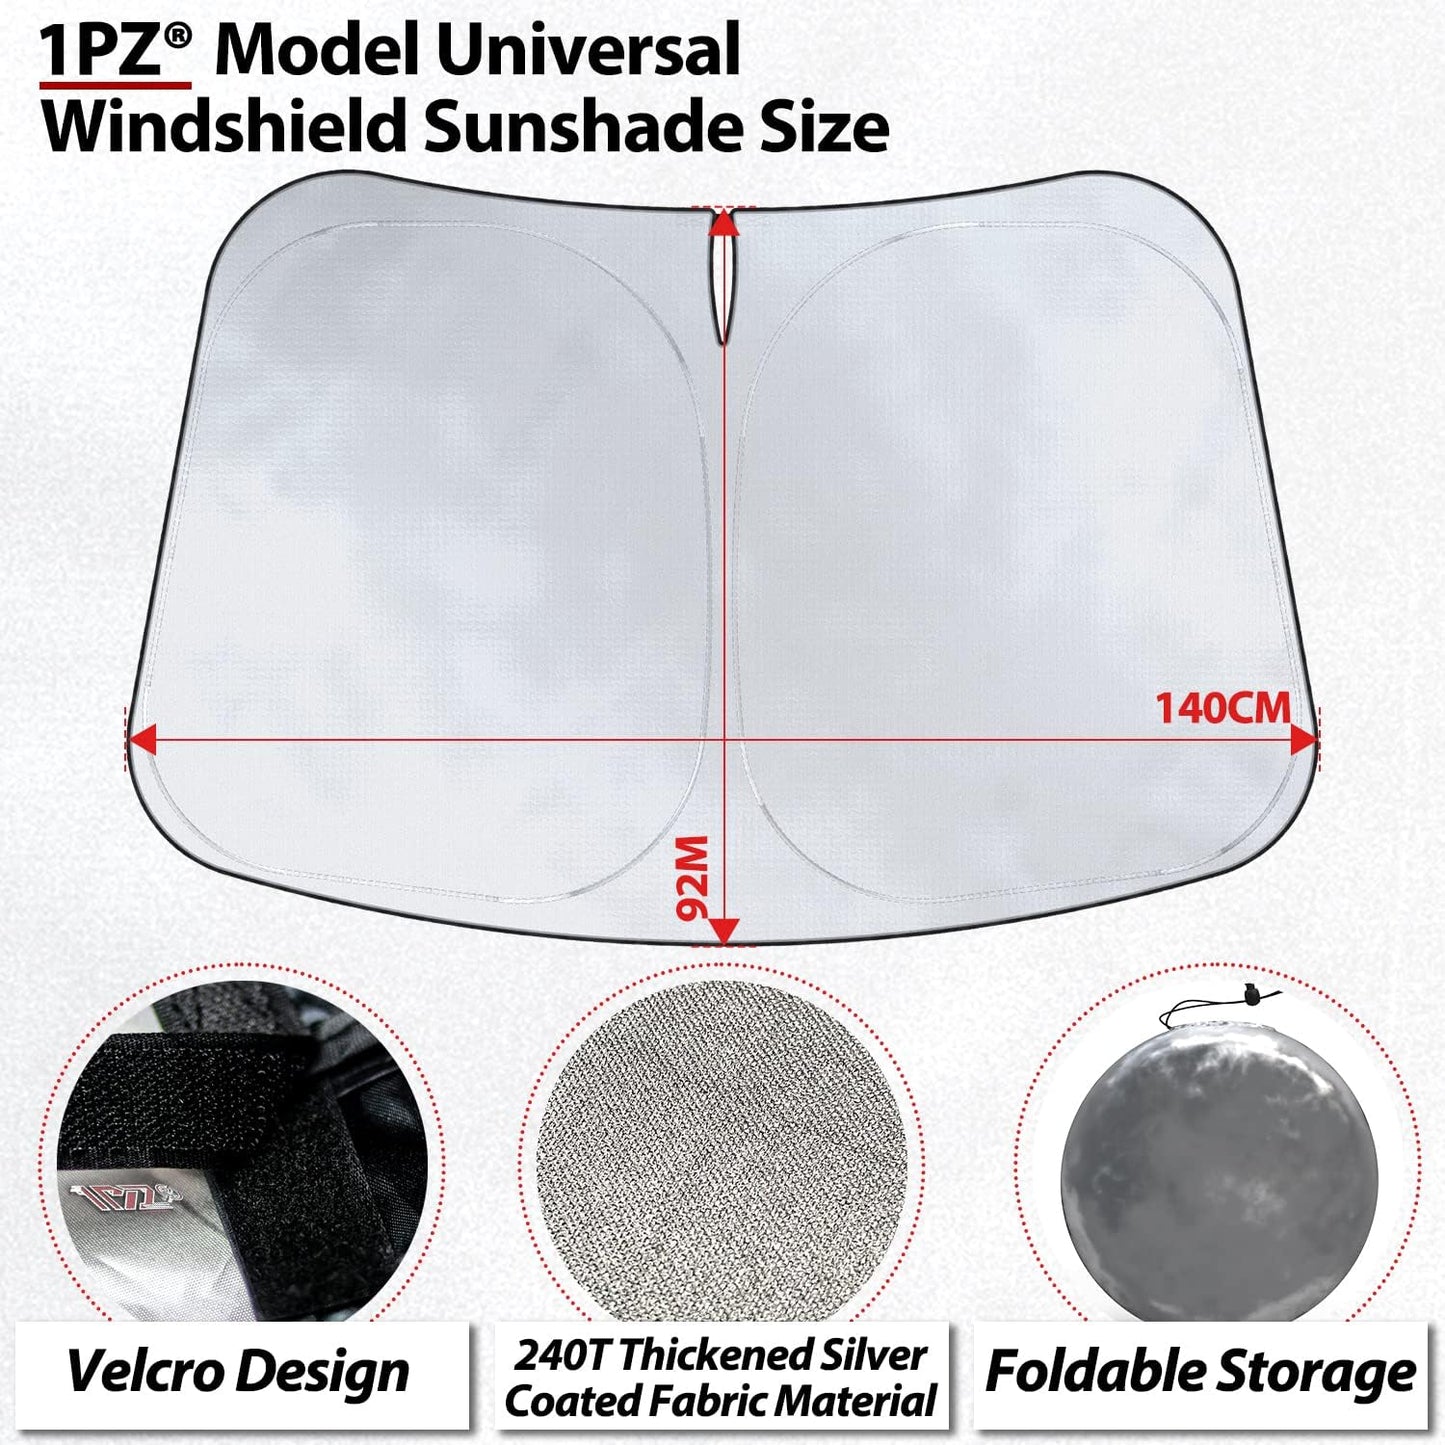 1PZ MO3-CYE Folding Windshield Sunshade Replacement for Tesla Model Y Model 3 Model X Model S Folding Front Window SunShade Double Layer UV Protection Heat Protection Visor